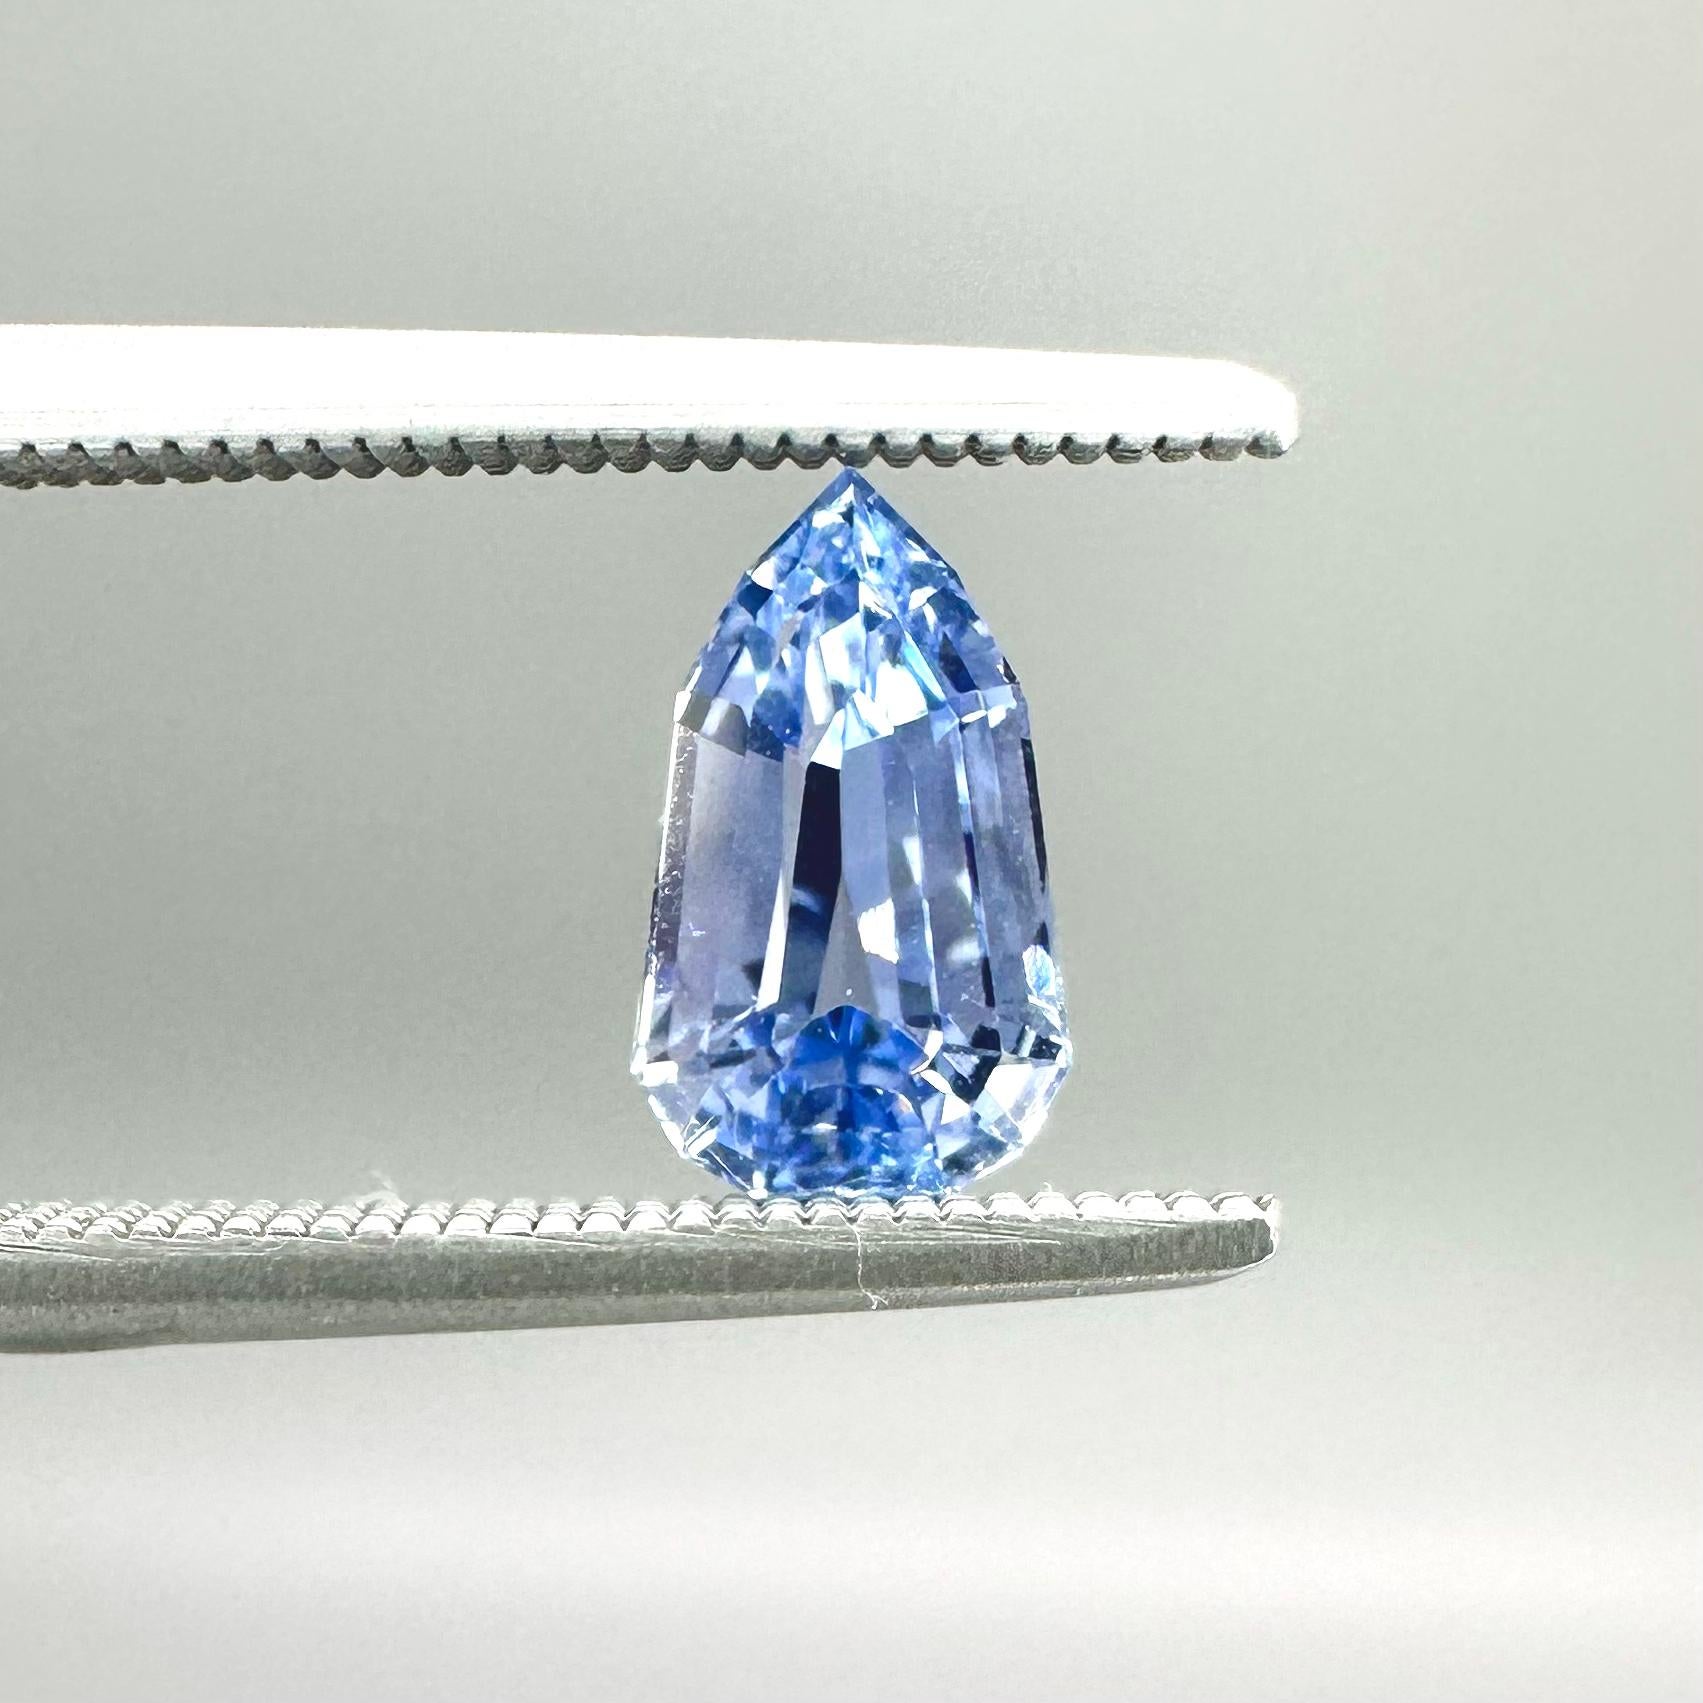 The pale ice blue and sharp, clean cut facets of this brilliant little sapphire invoke an arctic blast of winter air that rattles the icicles hanging from the eves. 

This beautiful and unusual 1.14 carat sapphire sports a modified shield cut, and